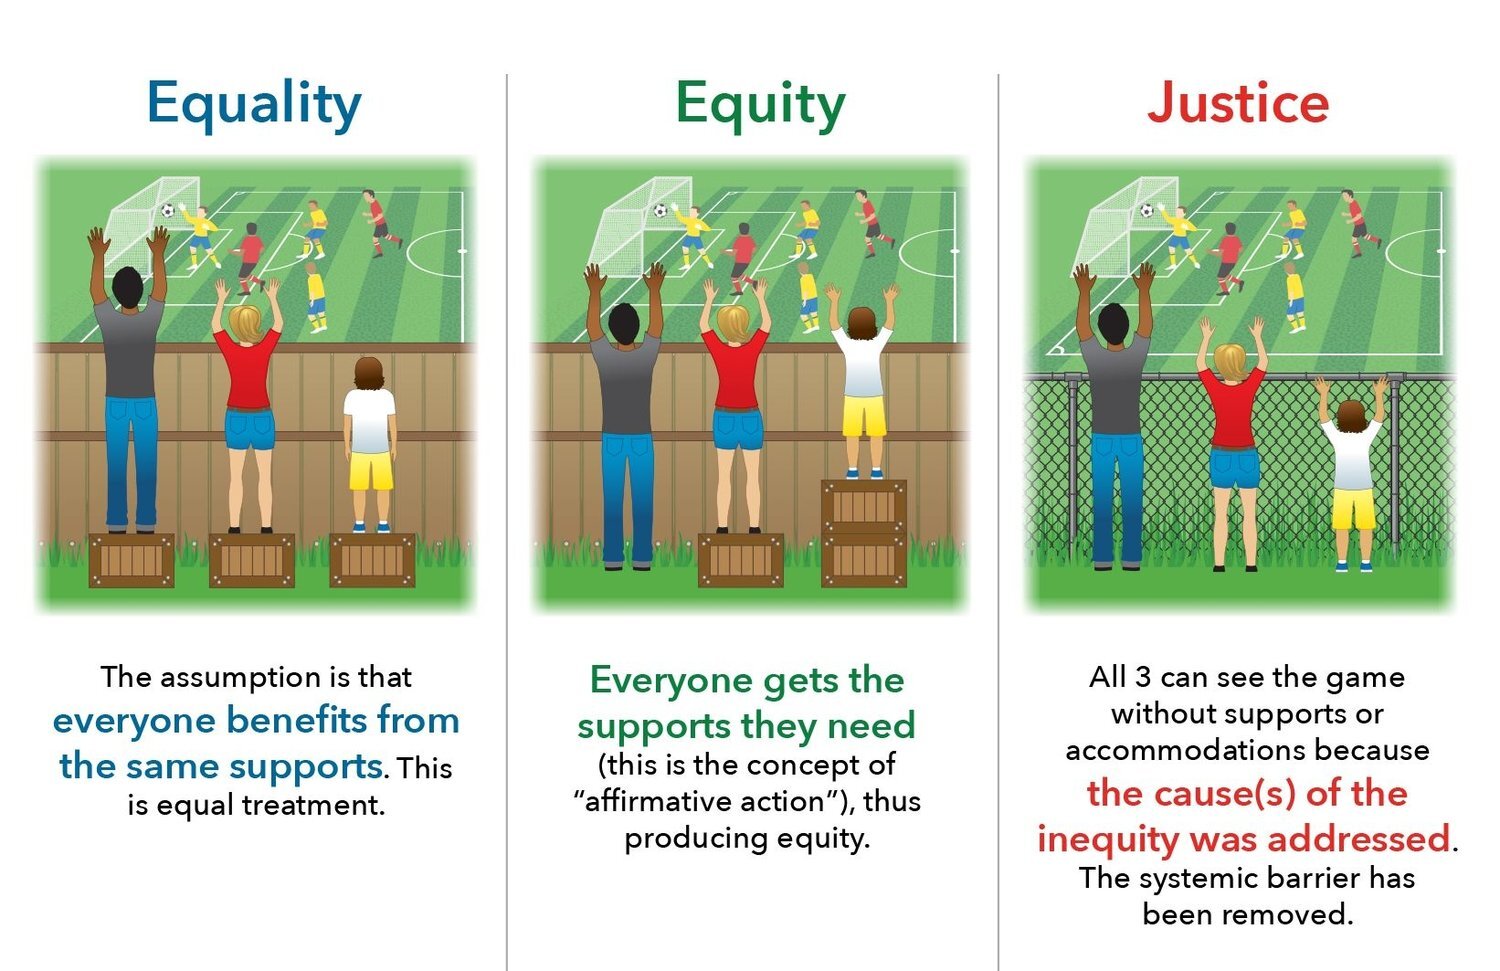 Three panels show the difference between equality, equity, and justice. Environmental equality would be the assumption that everyone benefits from the same types of support. Environmental equity is when everyone gets the support they need. Environmental justice is when the cause of the inequity is addressed